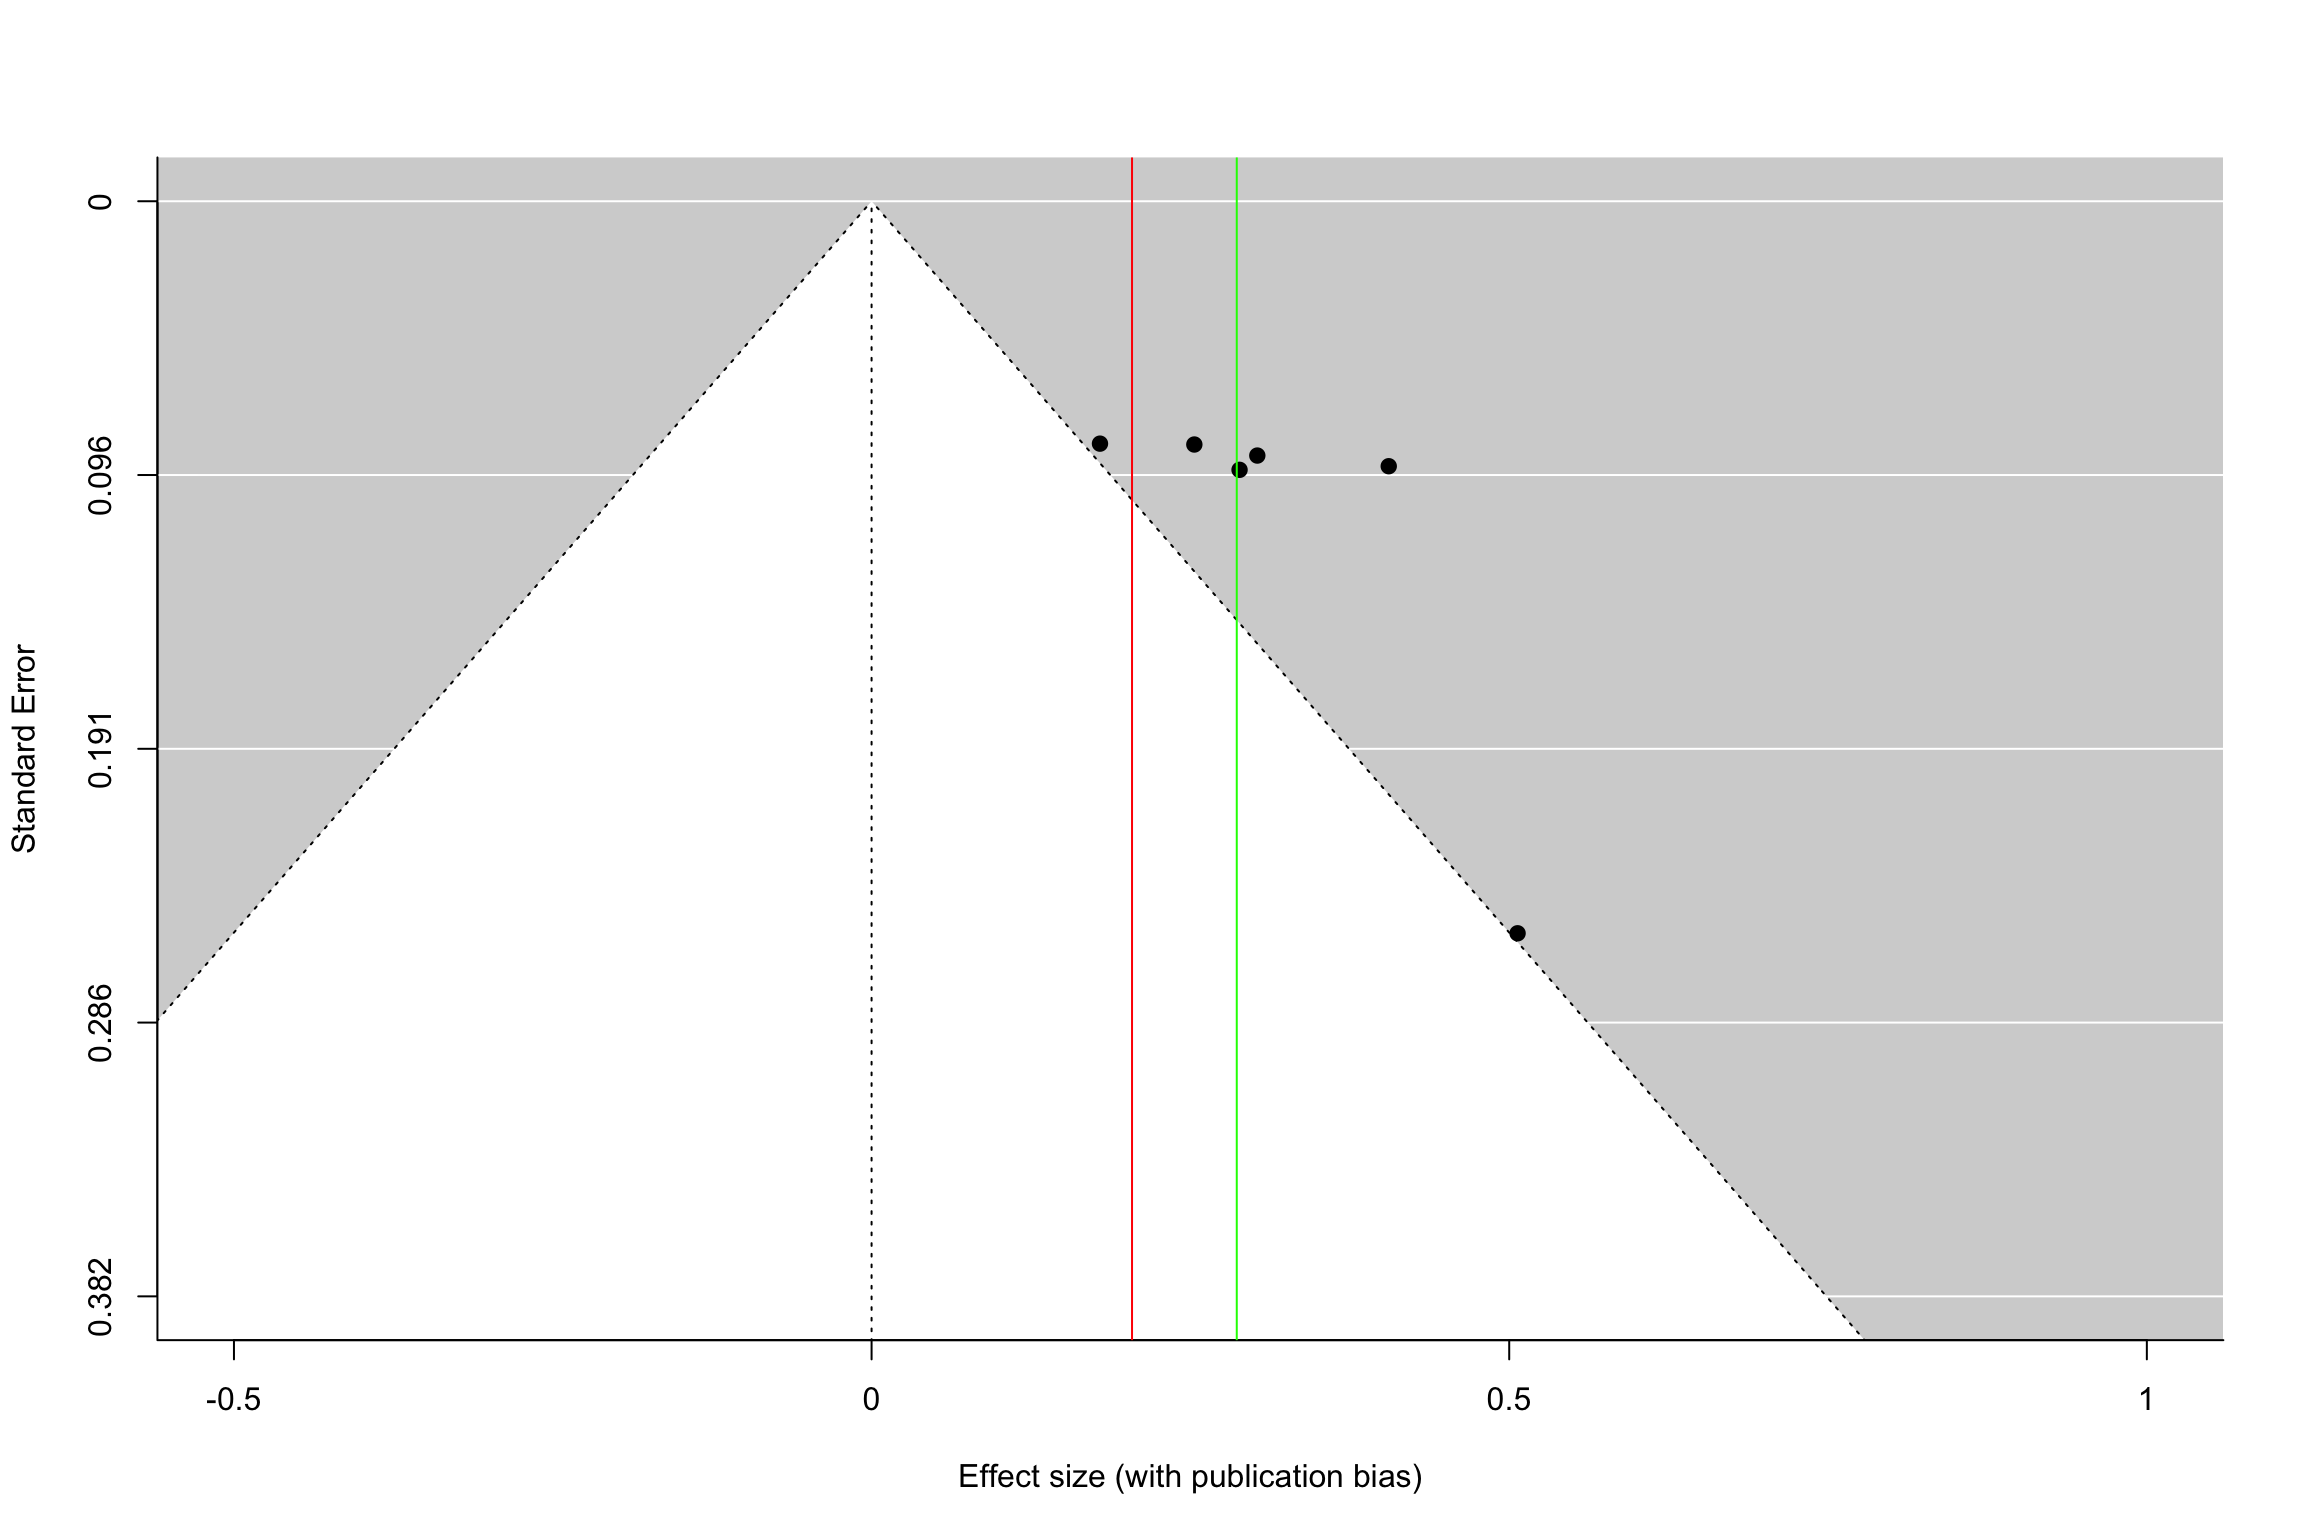 Funnel plot with and without publication bias (homogeneous treatment effects, small and intermediate precision)